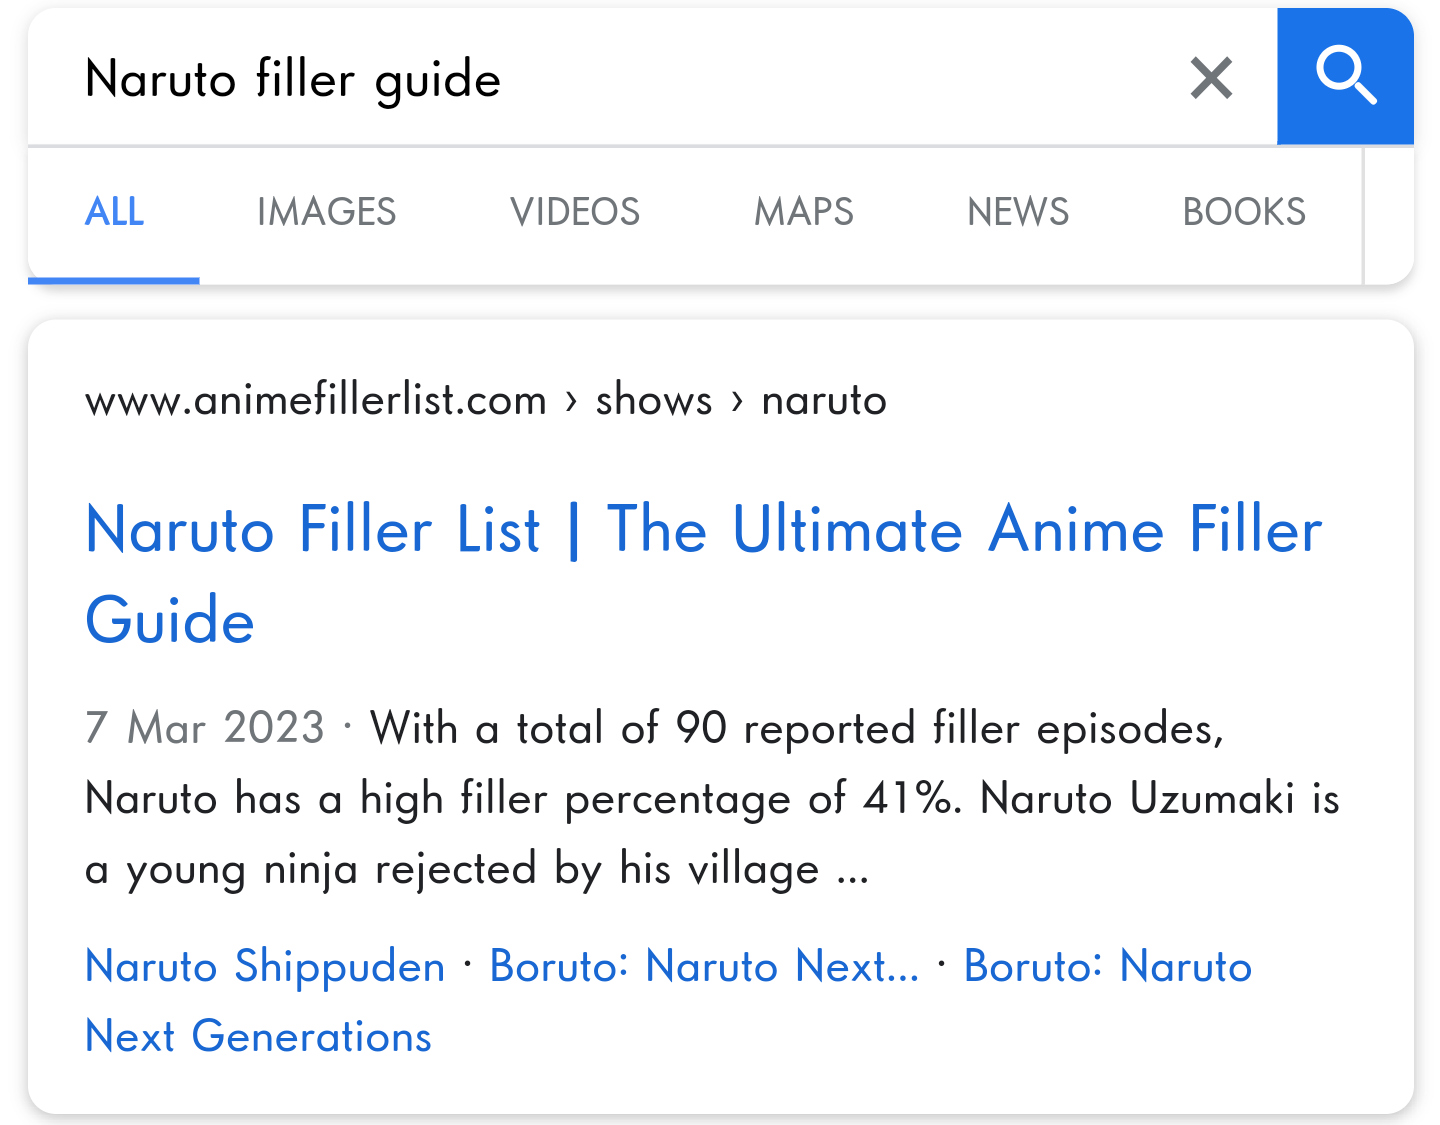 Is this Naruto Filler List Accurate?